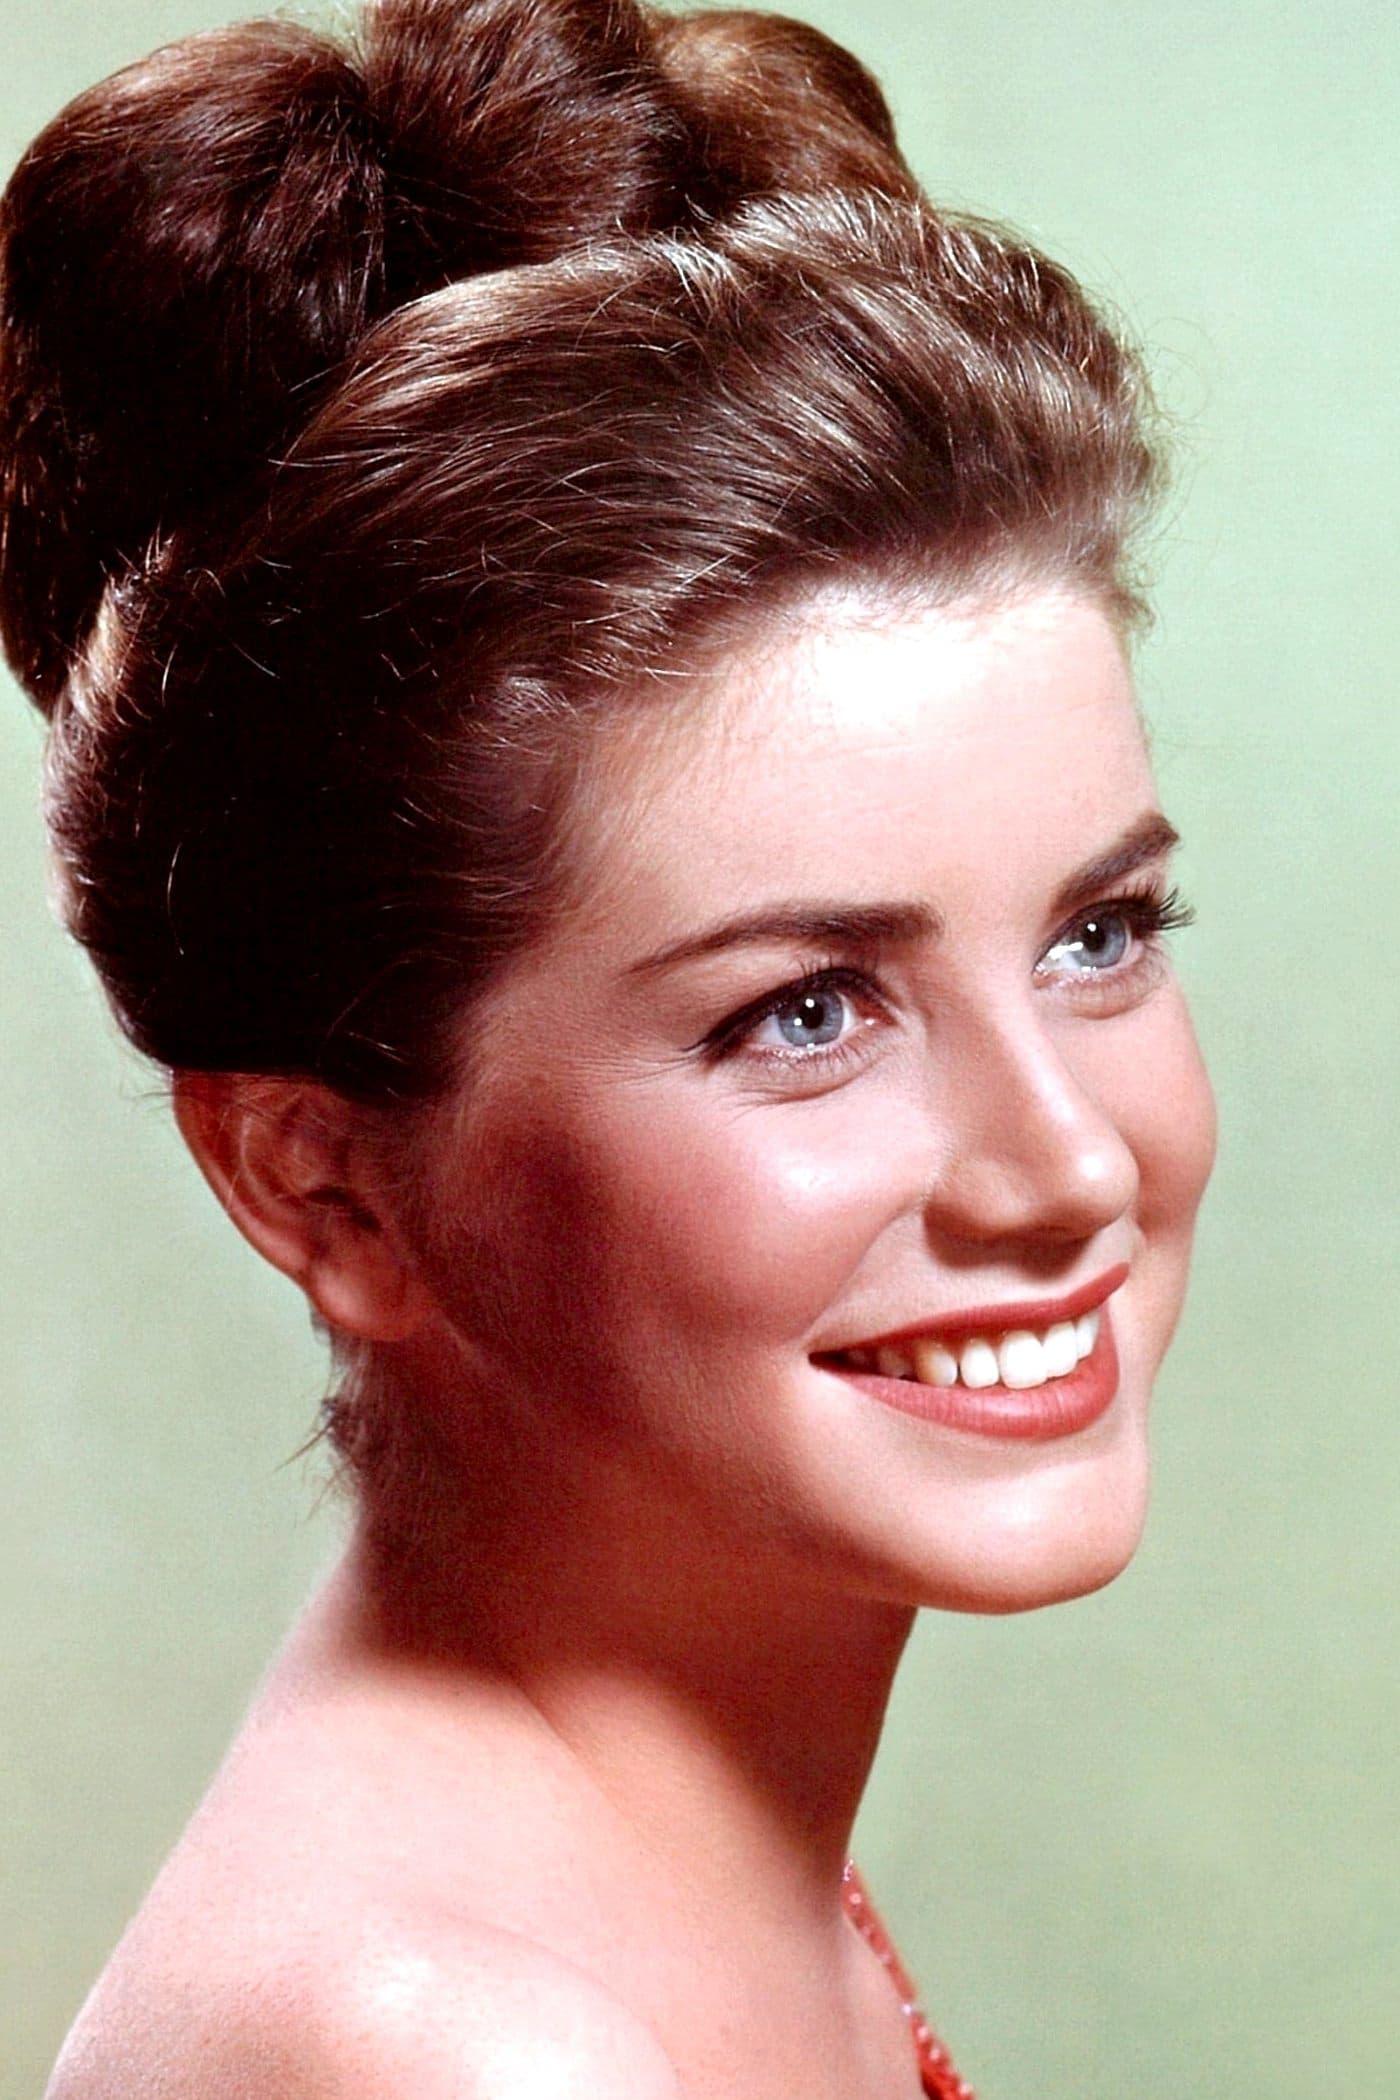 Dolores Hart | Herself